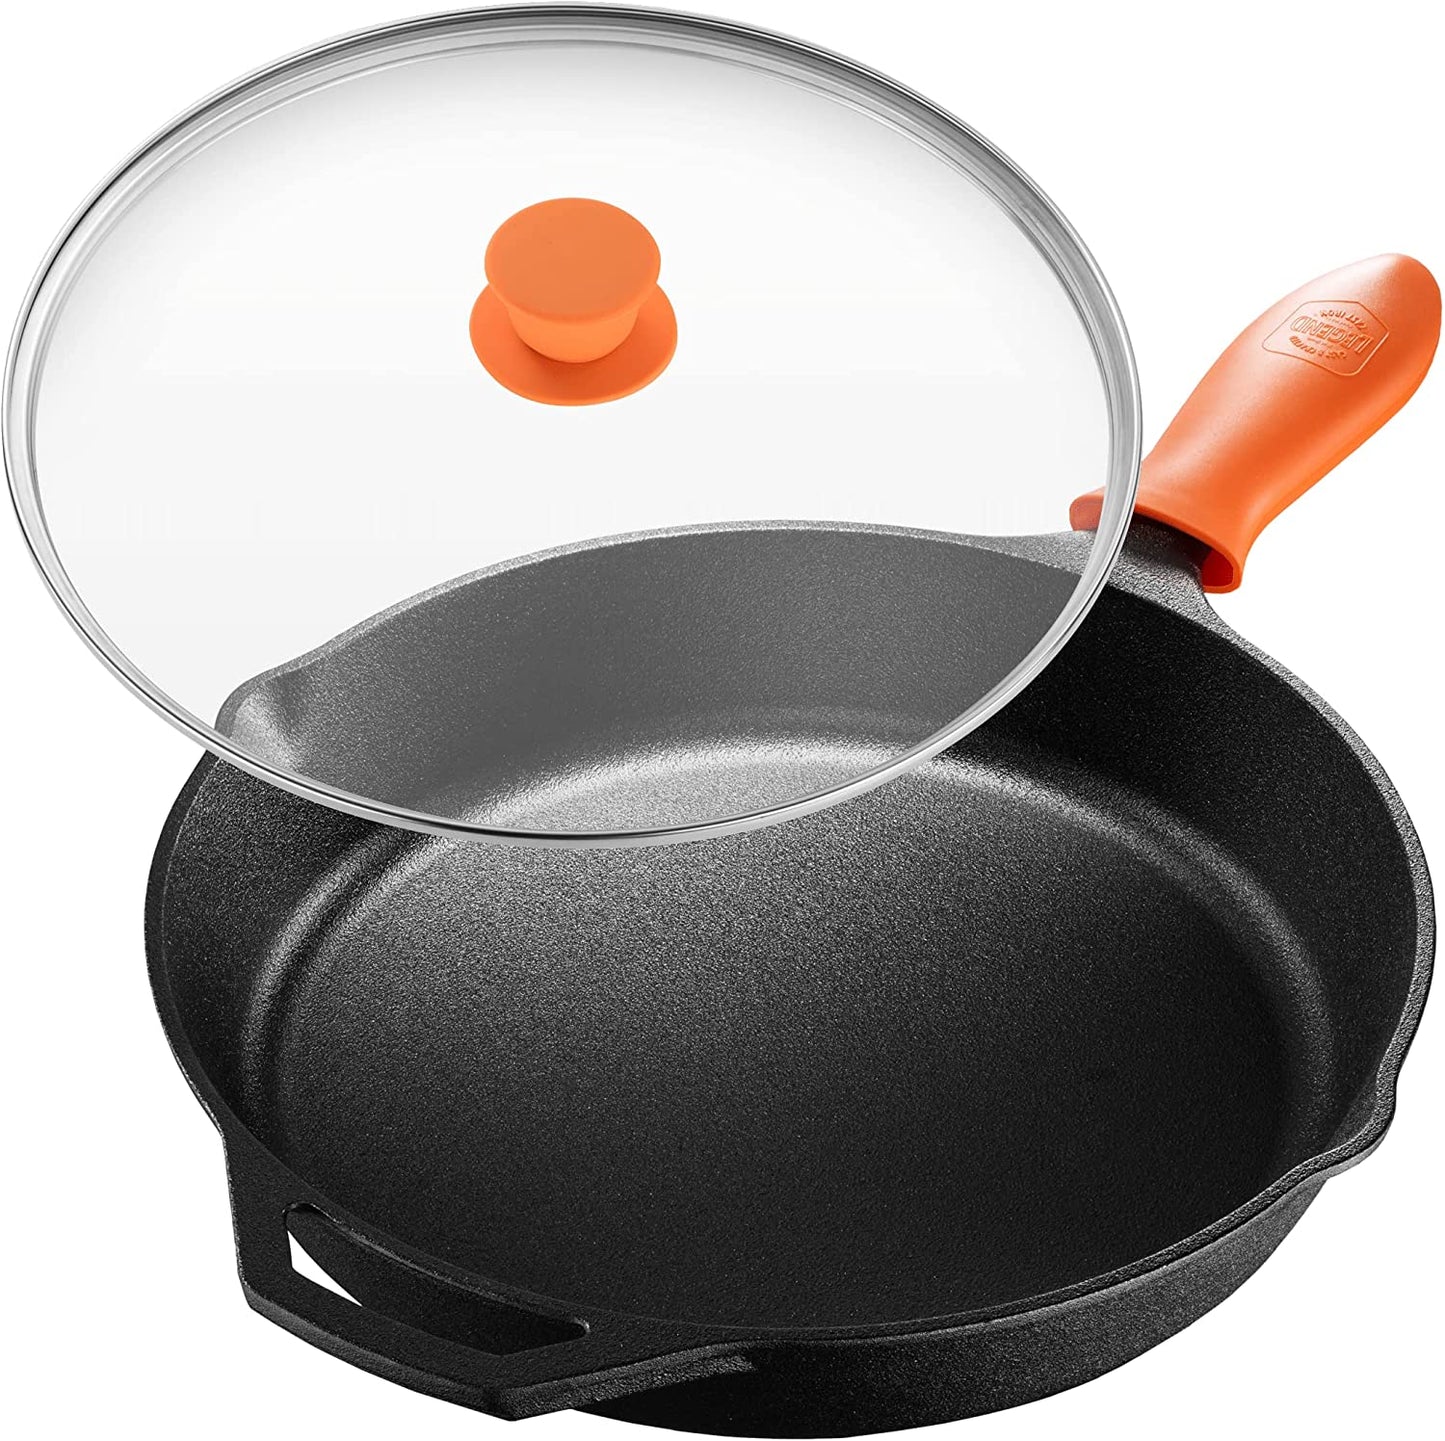 LEGEND COOKWARE | Cast Iron Skillet with Lid | Large 12” Frying Pan with  Glass Lid & Silicone Handle for Oven, Induction, Cooking, Pizza, Sautéing 